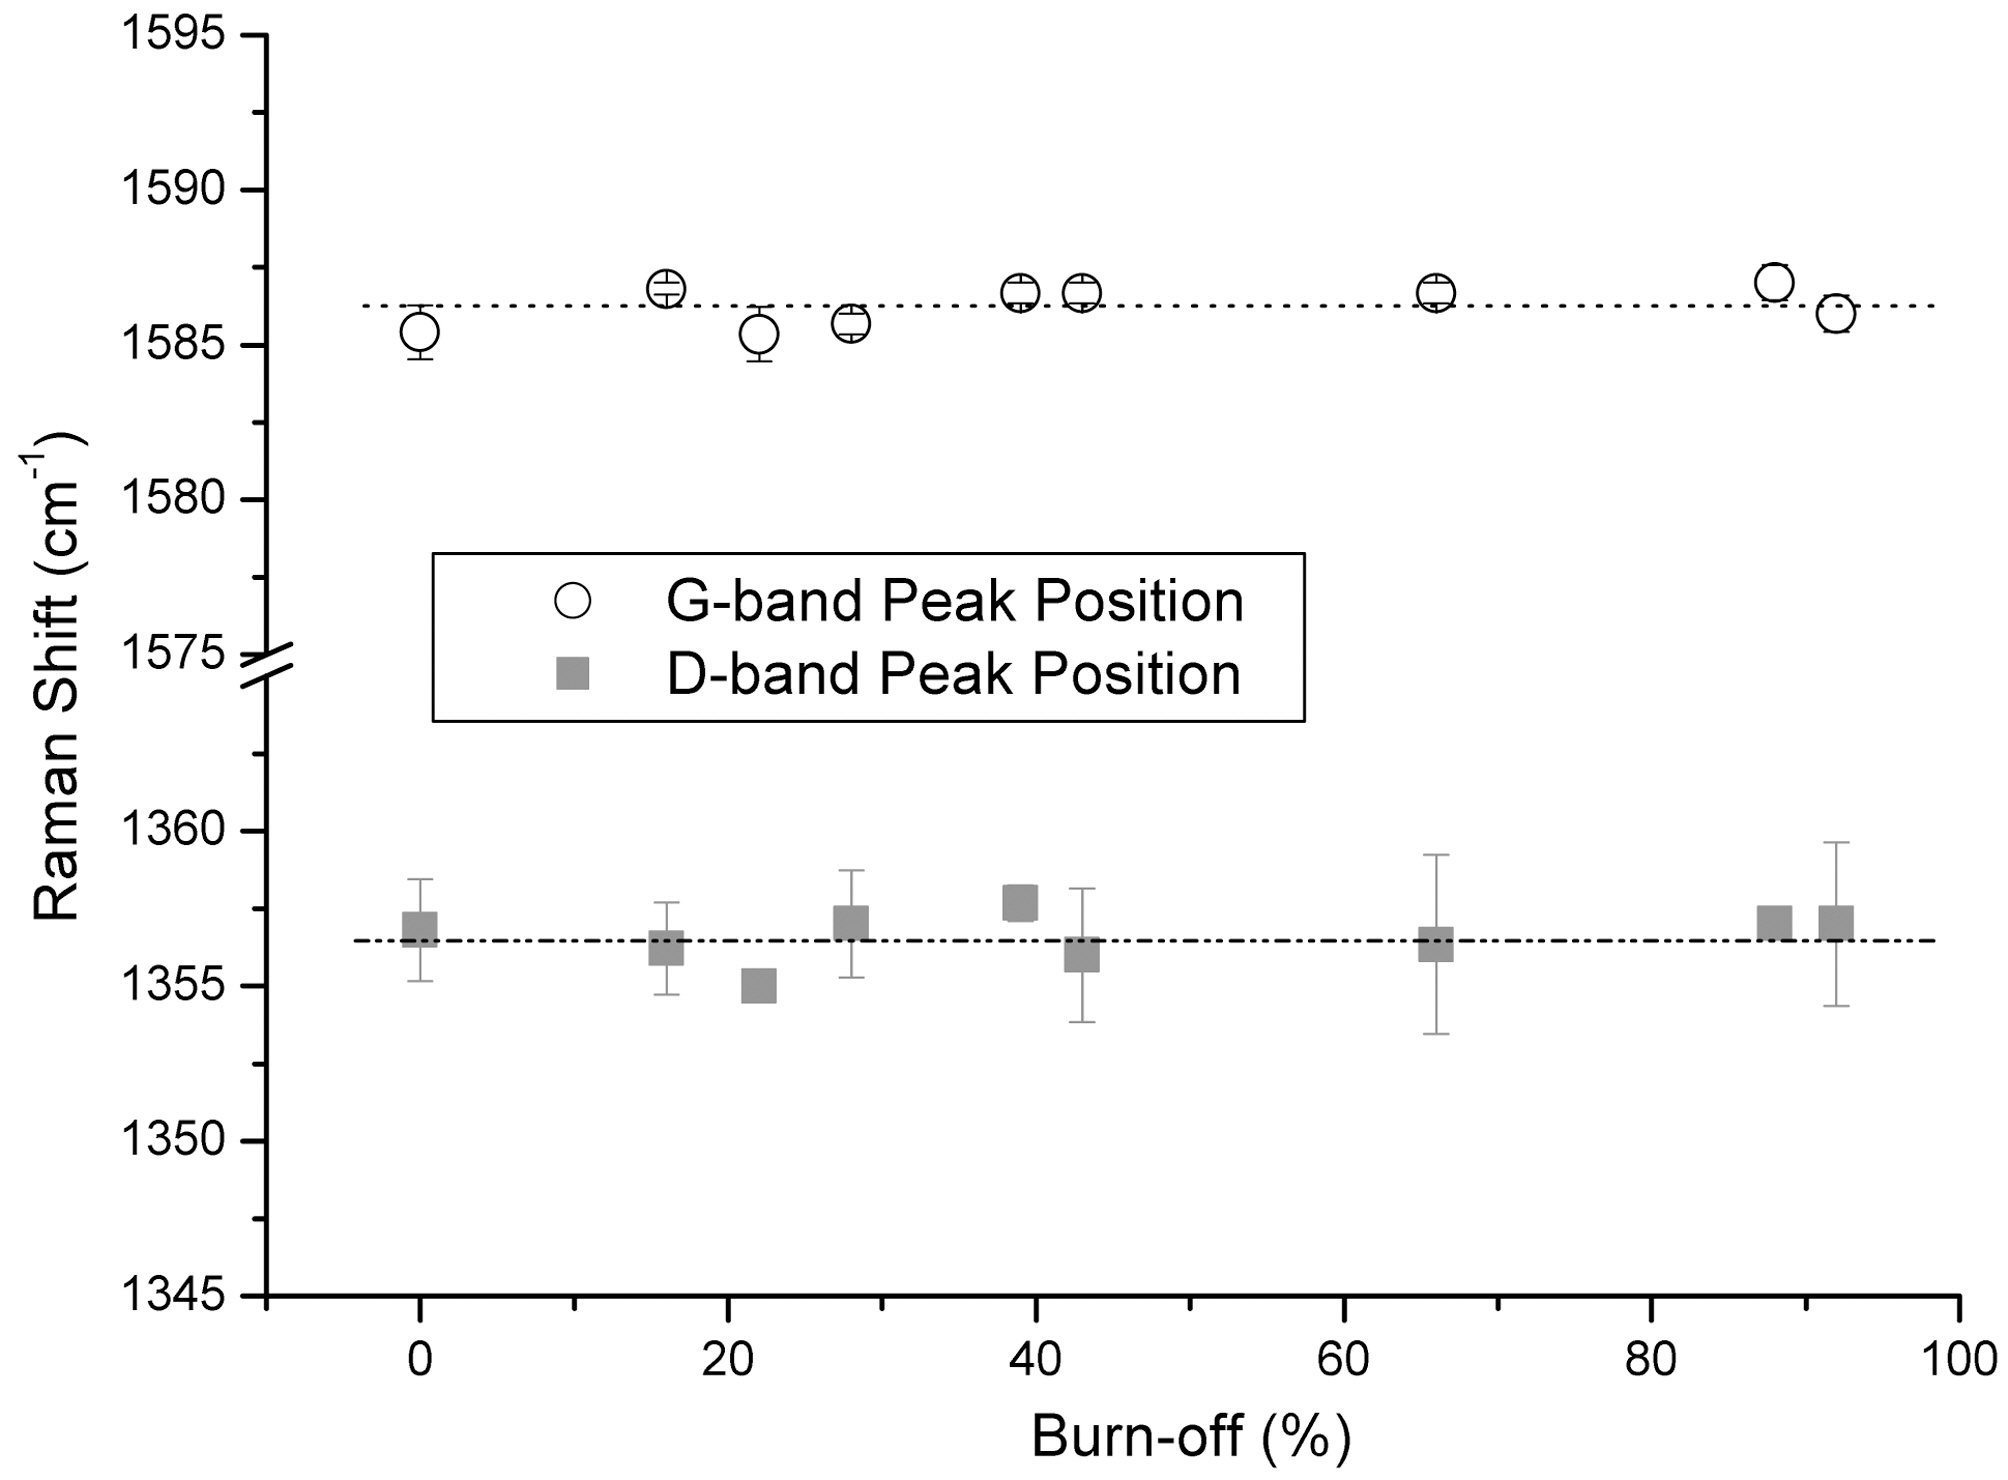 Peak positions of the HM fibers are not changed significantly as a function of burn-off degrees.